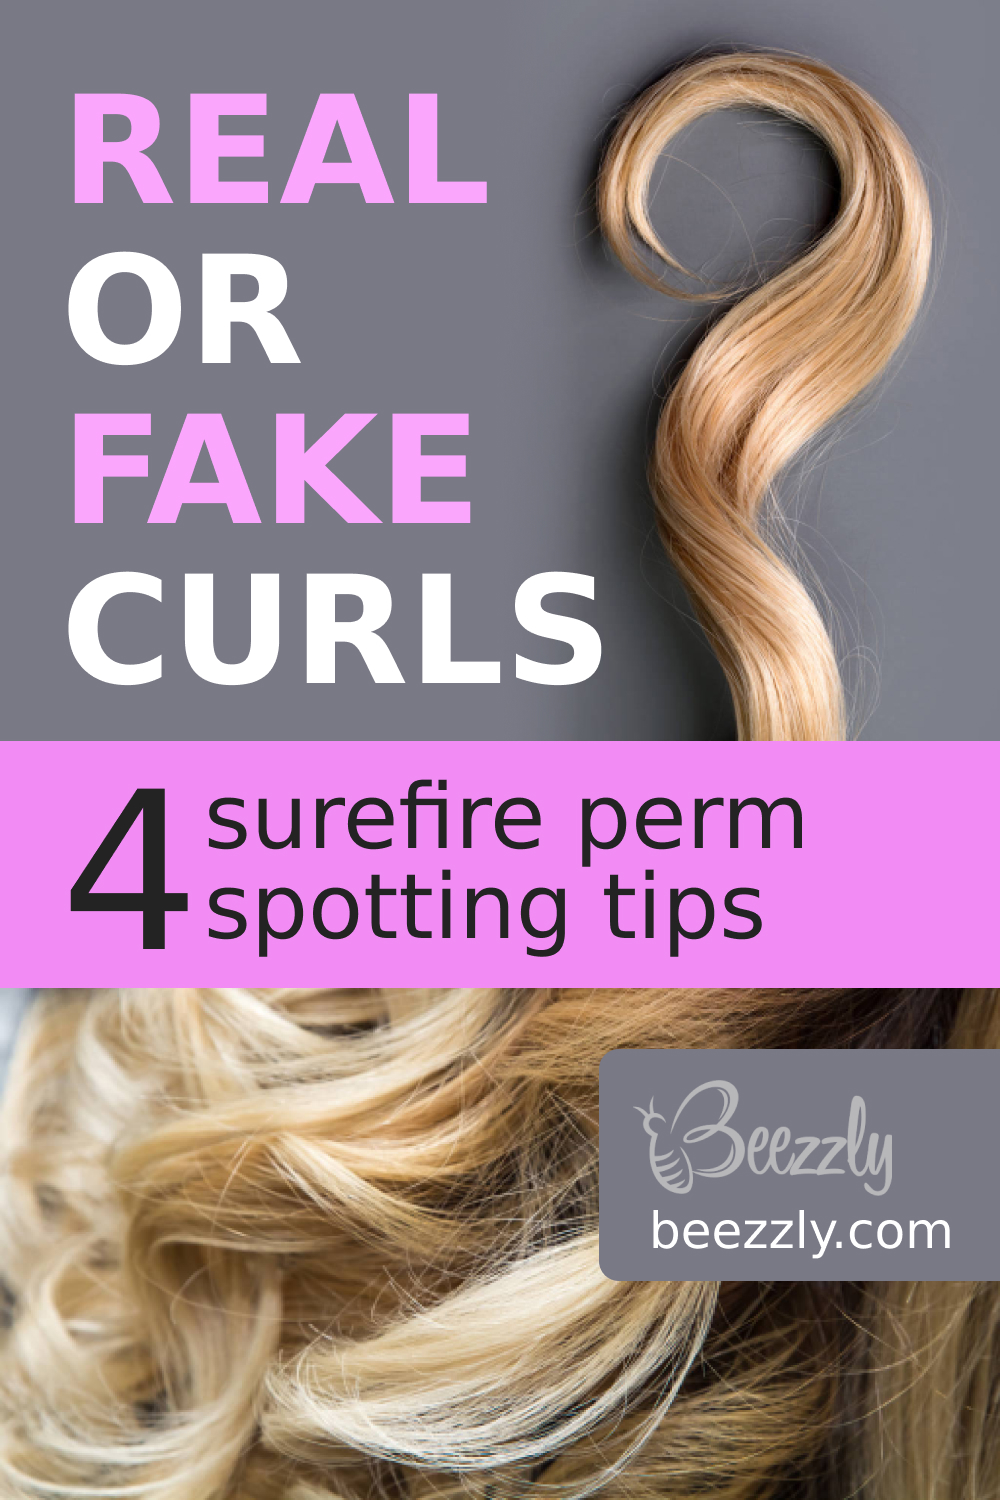 Real or Fake Curls 4 Surefire Perm Spotting Tips